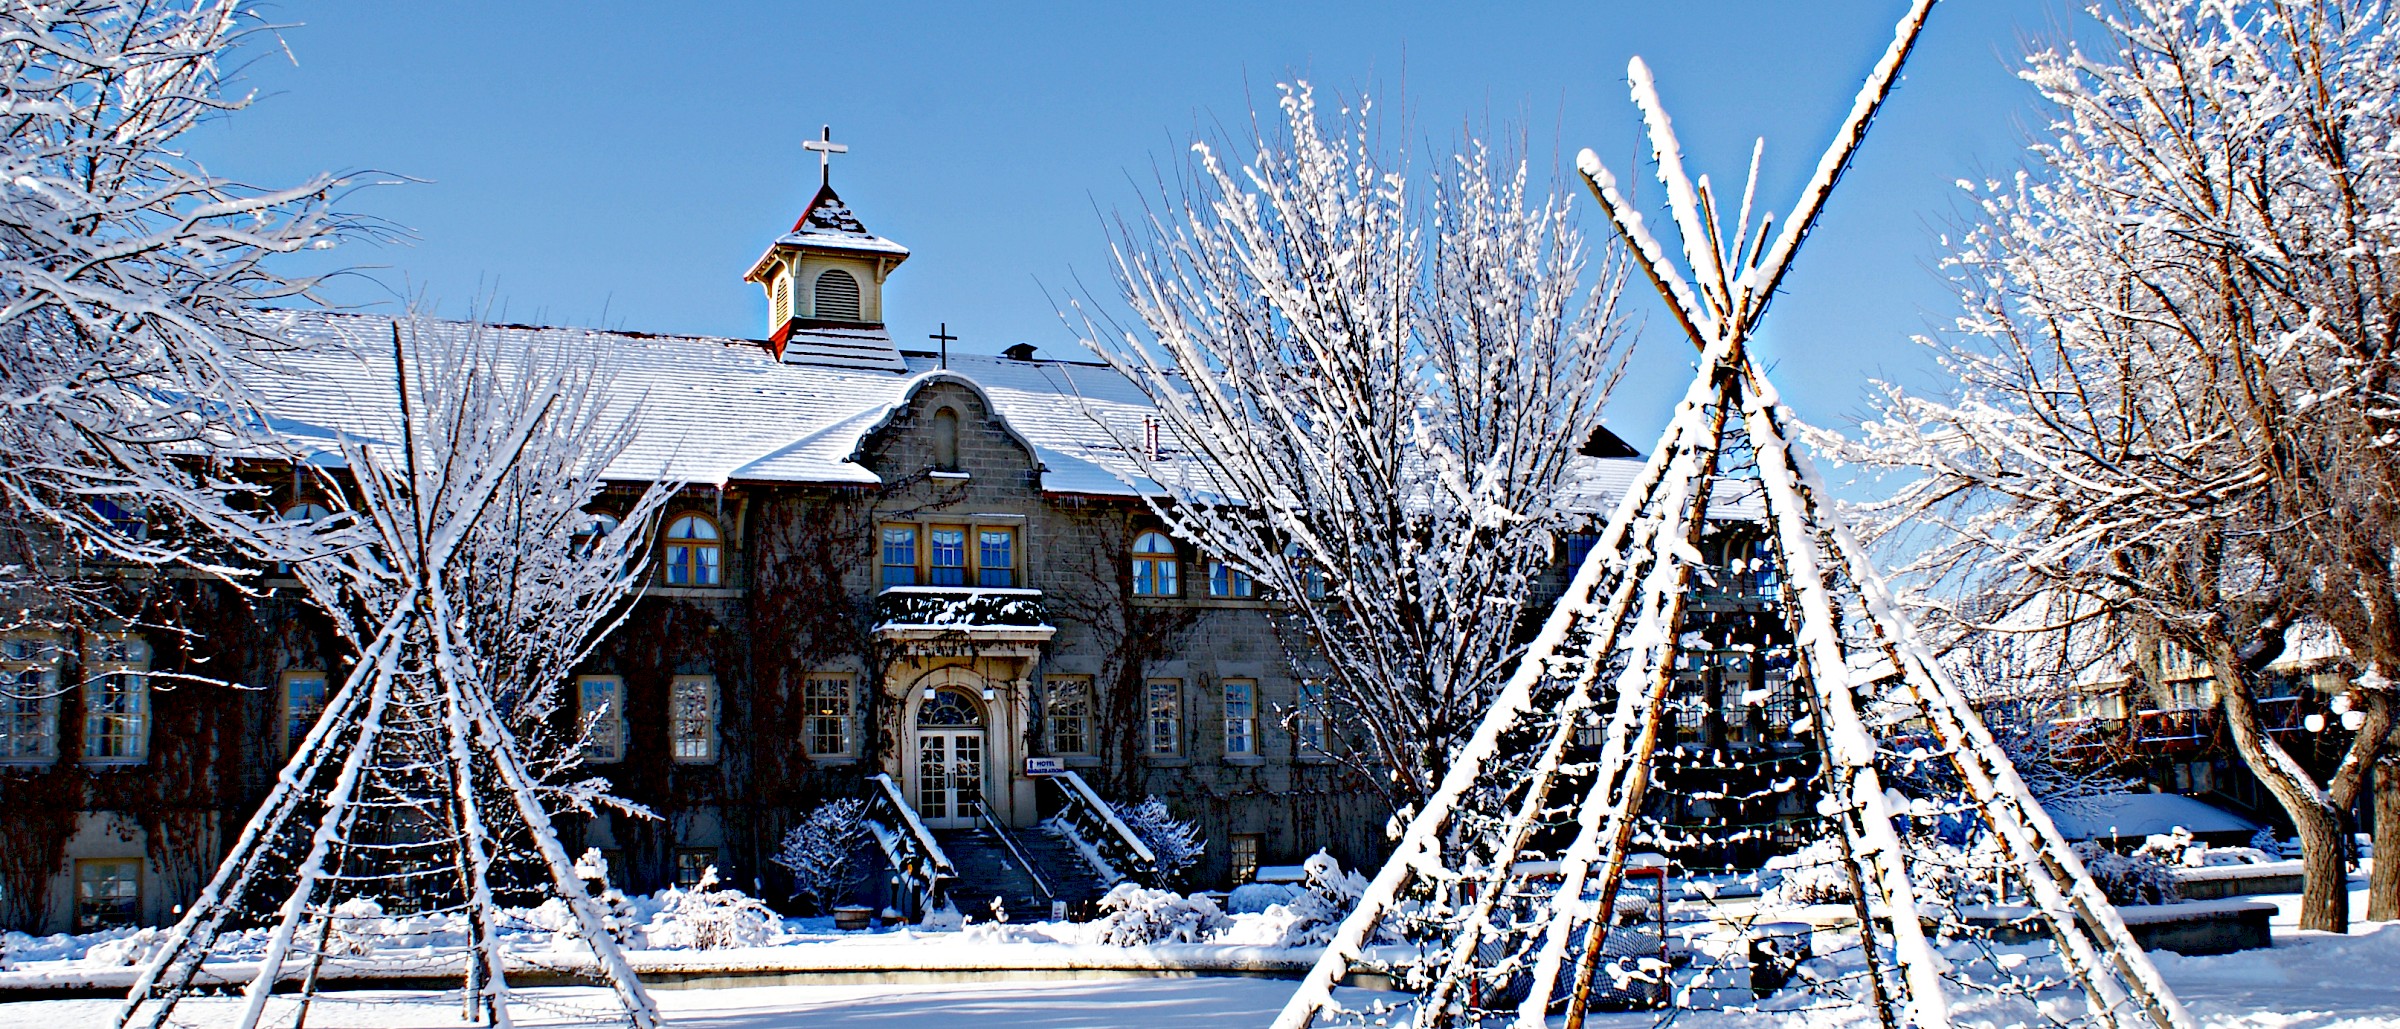 St. Eugene Mission Building with Snow